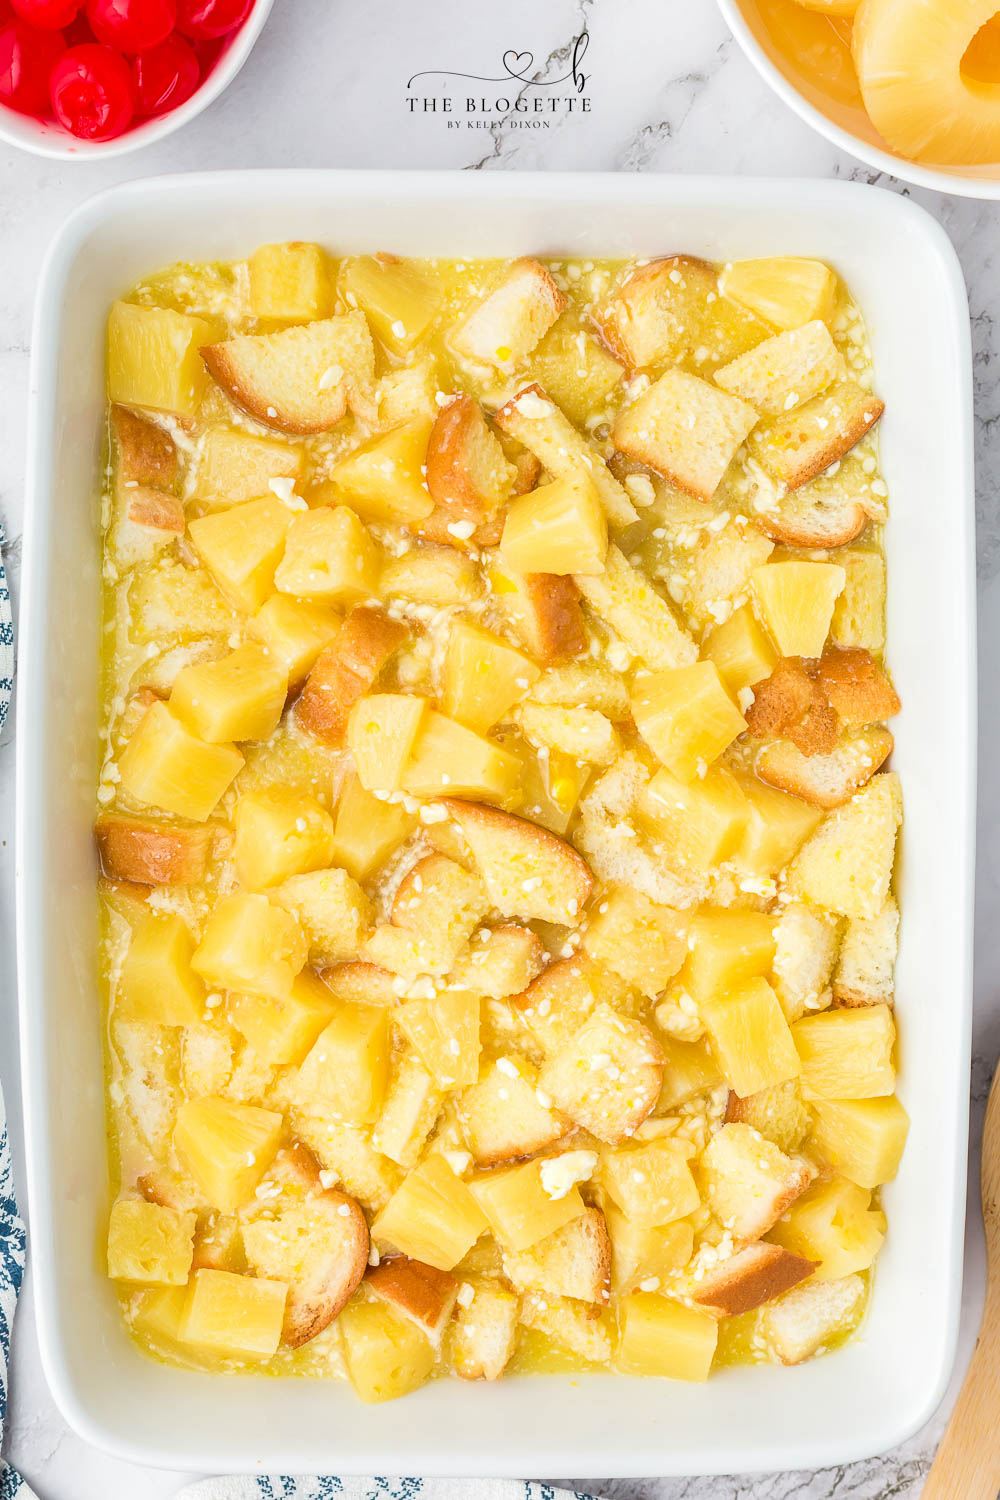 Pineapple mixture over bread in baking dish